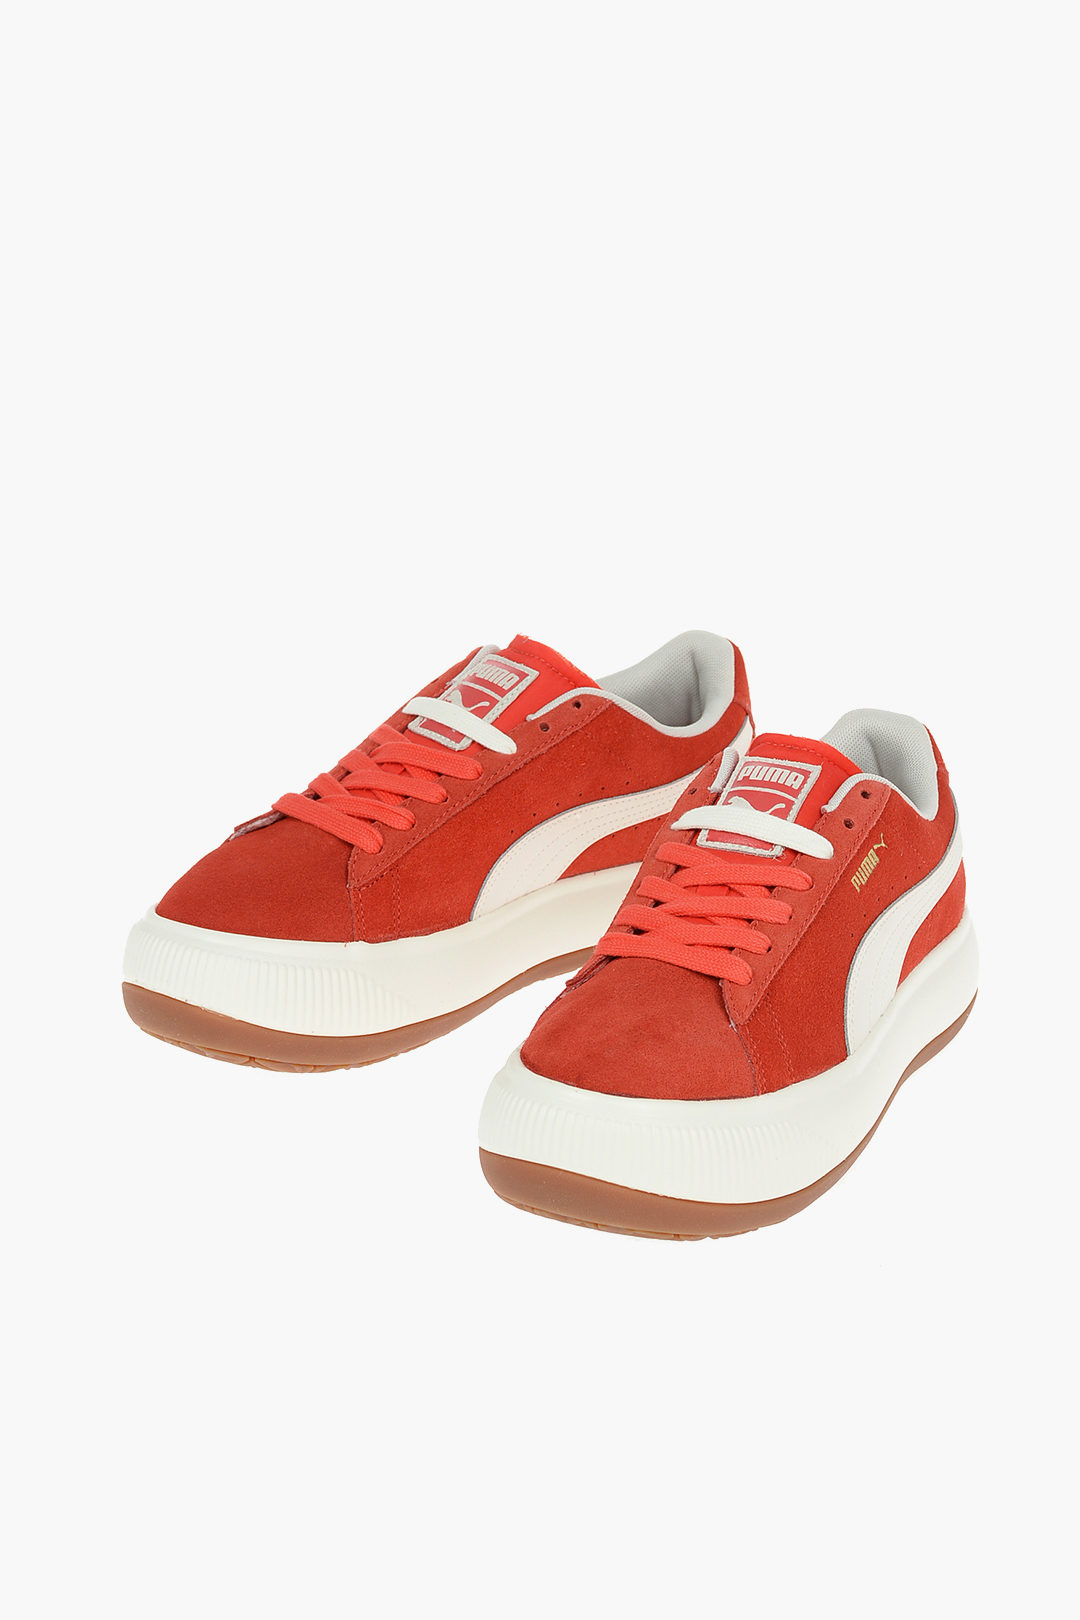 walvis Winst Andrew Halliday Puma Suede MAYU Sneakers women - Glamood Outlet